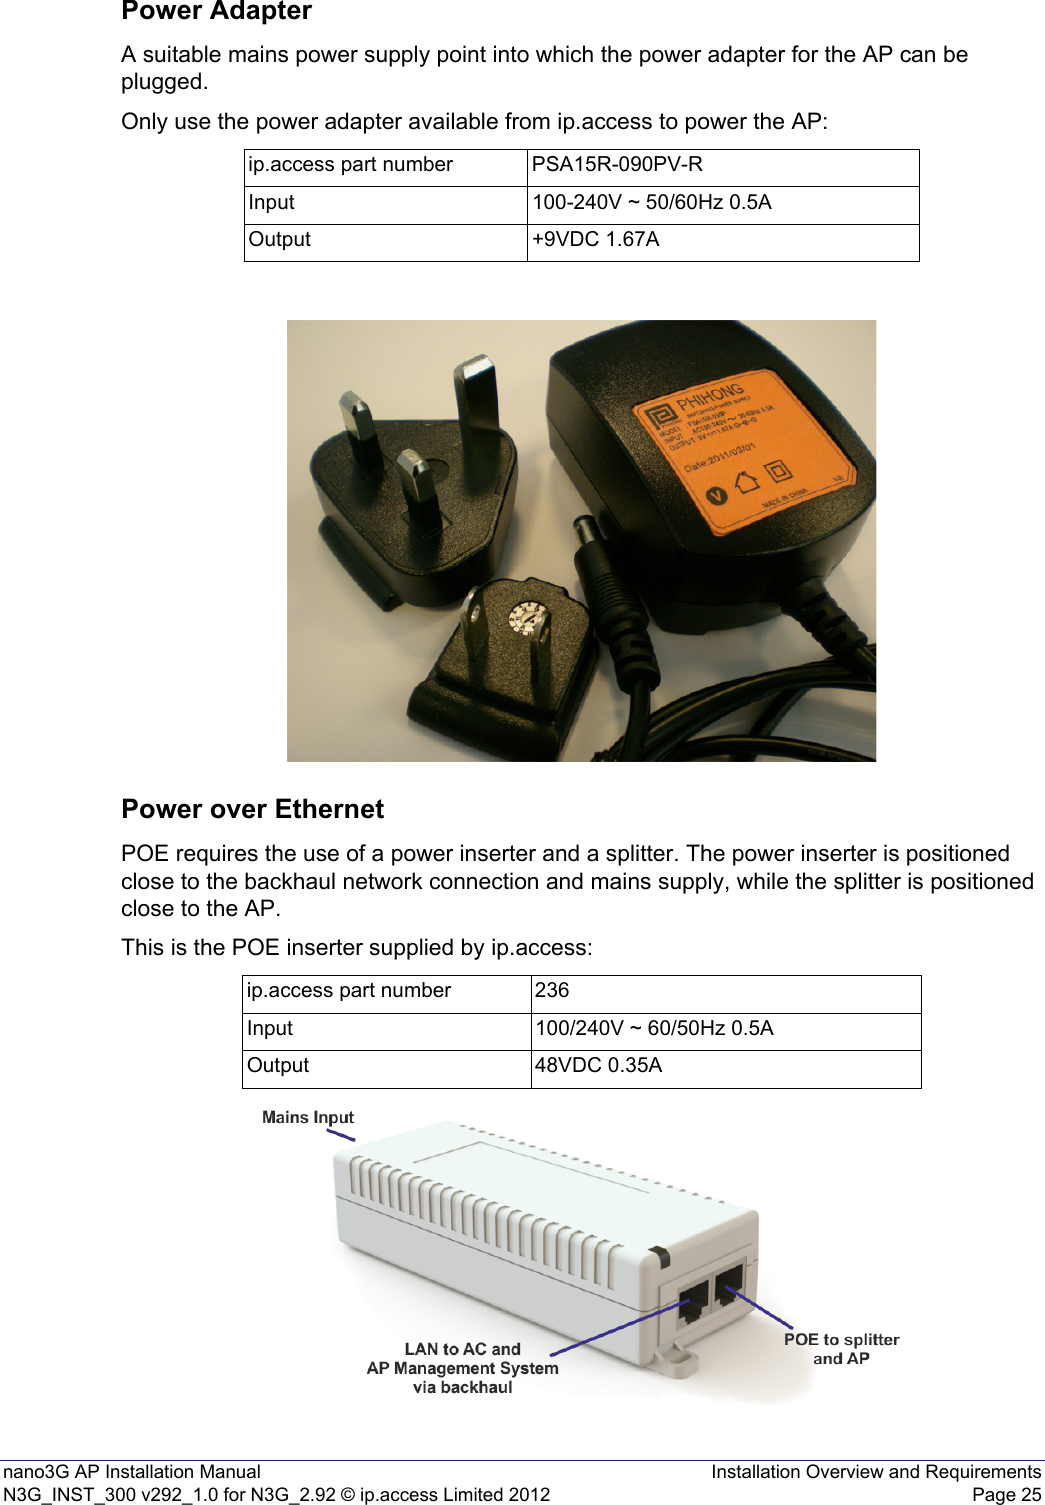 nano3G AP Installation Manual Installation Overview and RequirementsN3G_INST_300 v292_1.0 for N3G_2.92 © ip.access Limited 2012 Page 25Power AdapterA suitable mains power supply point into which the power adapter for the AP can be plugged.Only use the power adapter available from ip.access to power the AP:Power over EthernetPOE requires the use of a power inserter and a splitter. The power inserter is positioned close to the backhaul network connection and mains supply, while the splitter is positioned close to the AP.This is the POE inserter supplied by ip.access:ip.access part number PSA15R-090PV-RInput 100-240V ~ 50/60Hz 0.5AOutput +9VDC 1.67Aip.access part number 236Input 100/240V ~ 60/50Hz 0.5AOutput 48VDC 0.35A